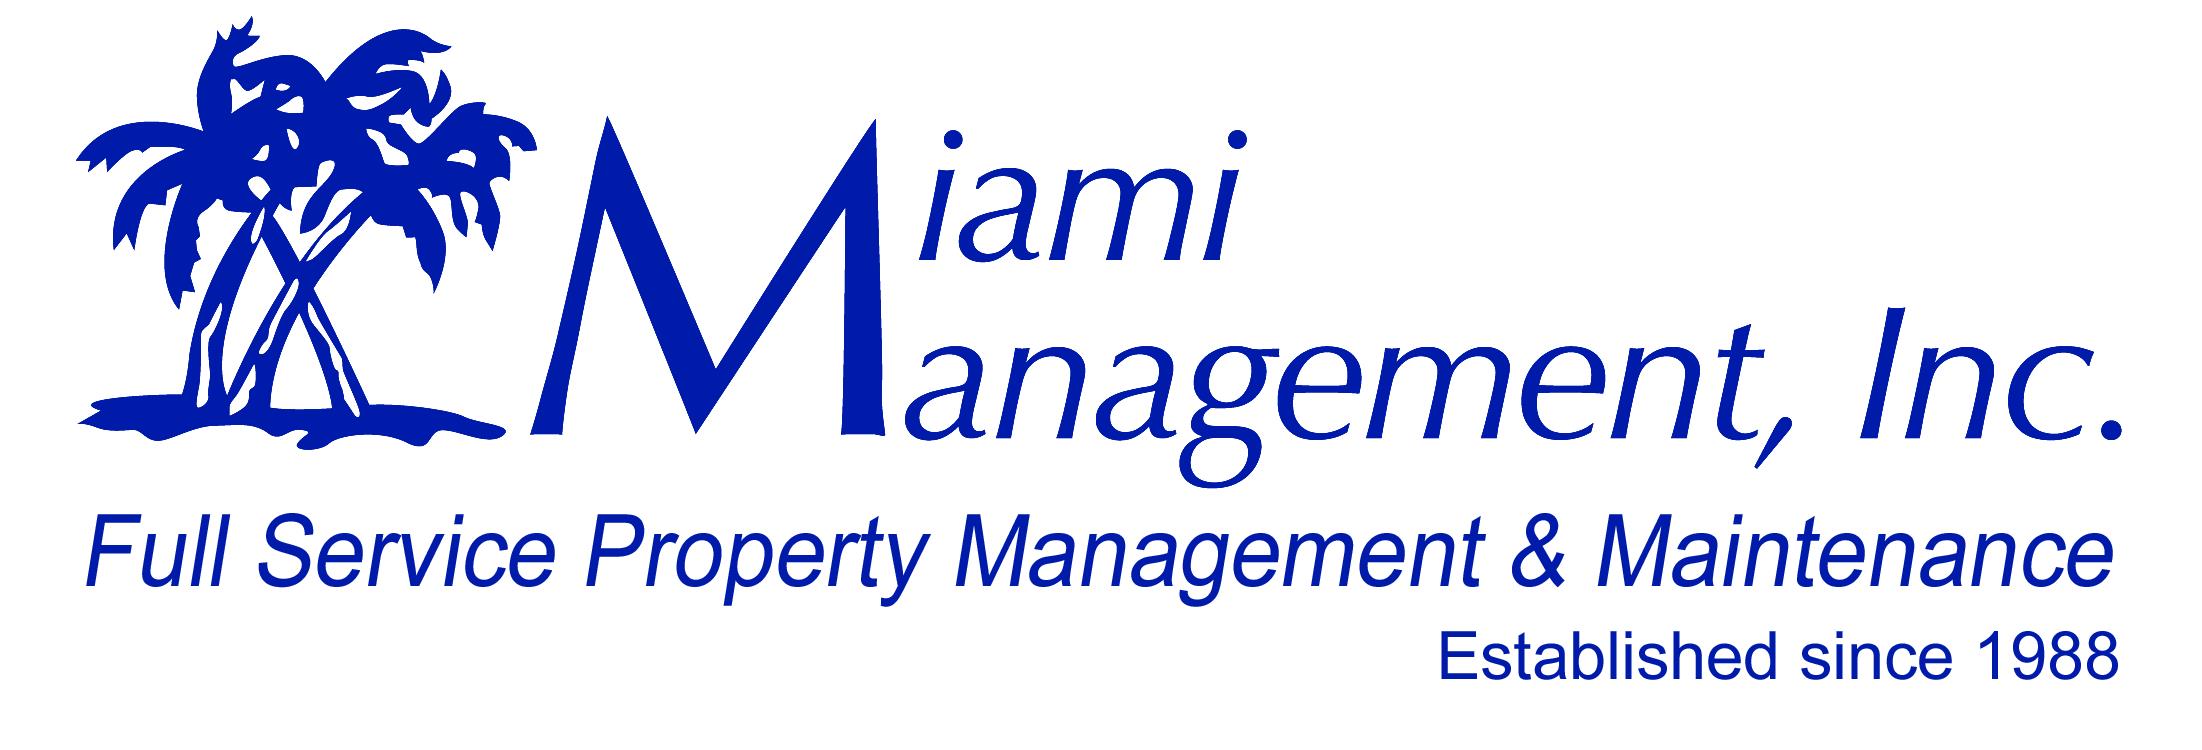 The Best Property Management in Miami, FL